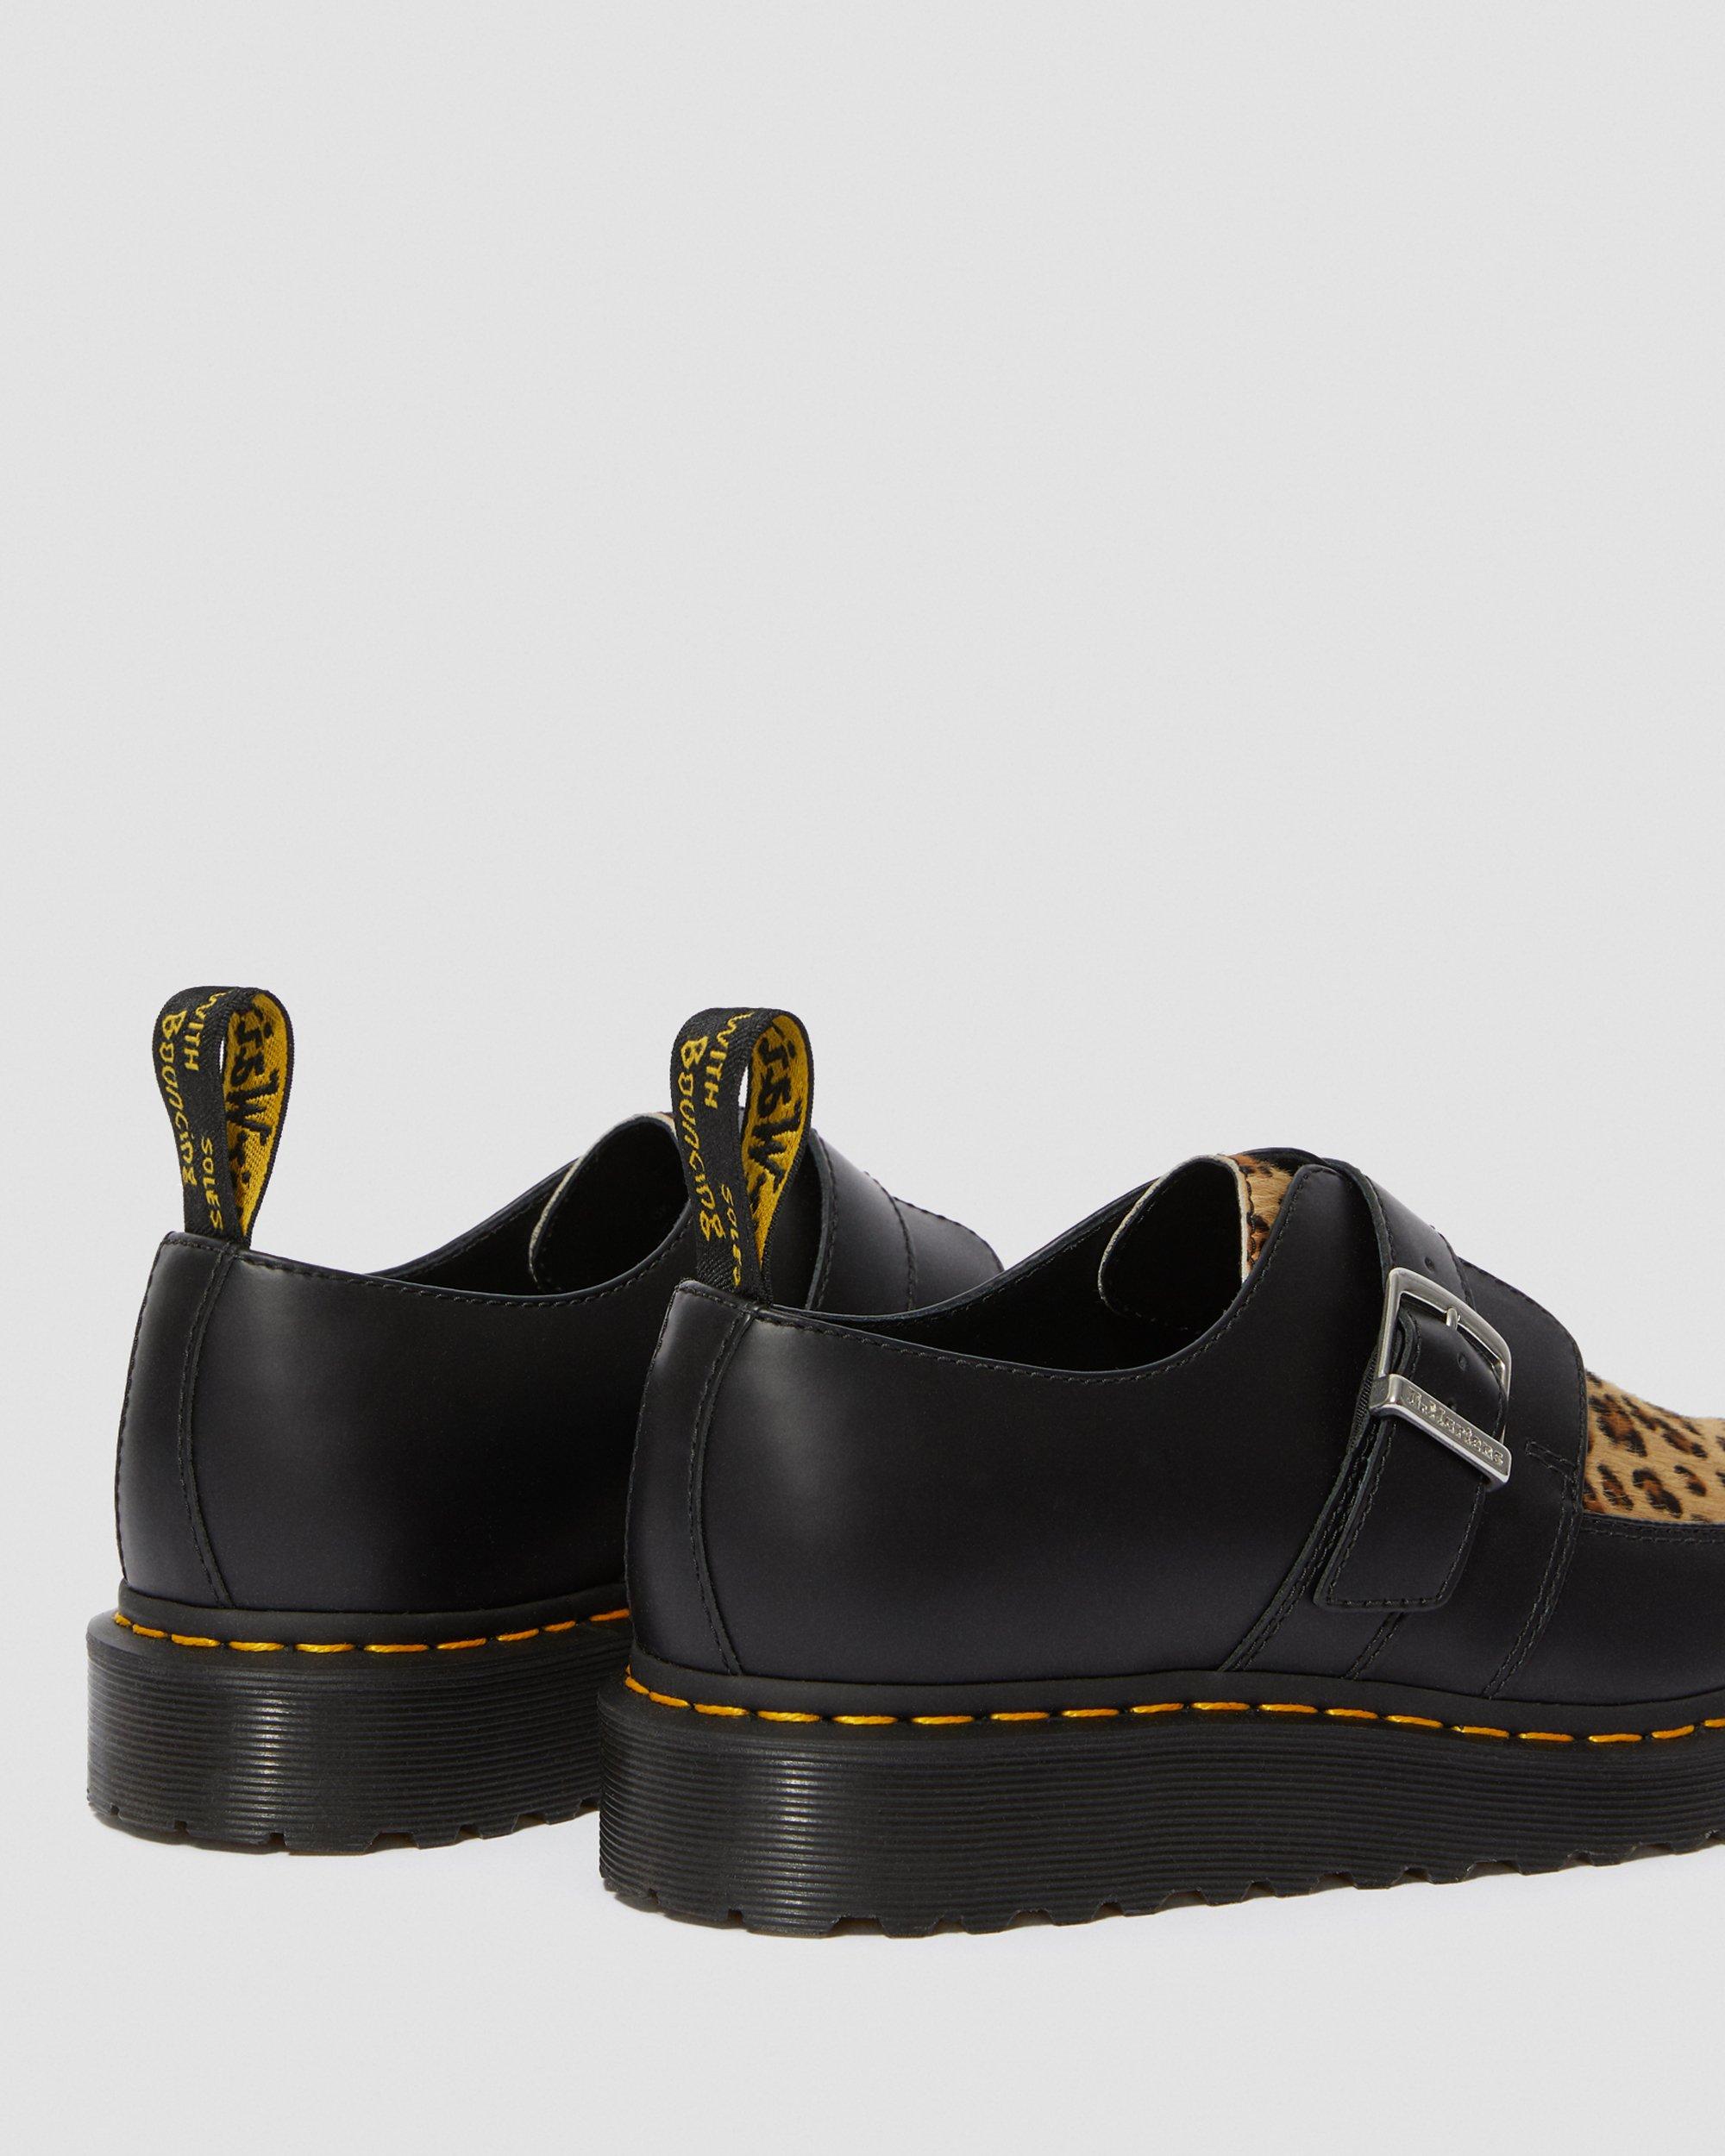 RAMSEY MONK SMOOTH LEATHER CREEPER SHOES | Dr. Martens